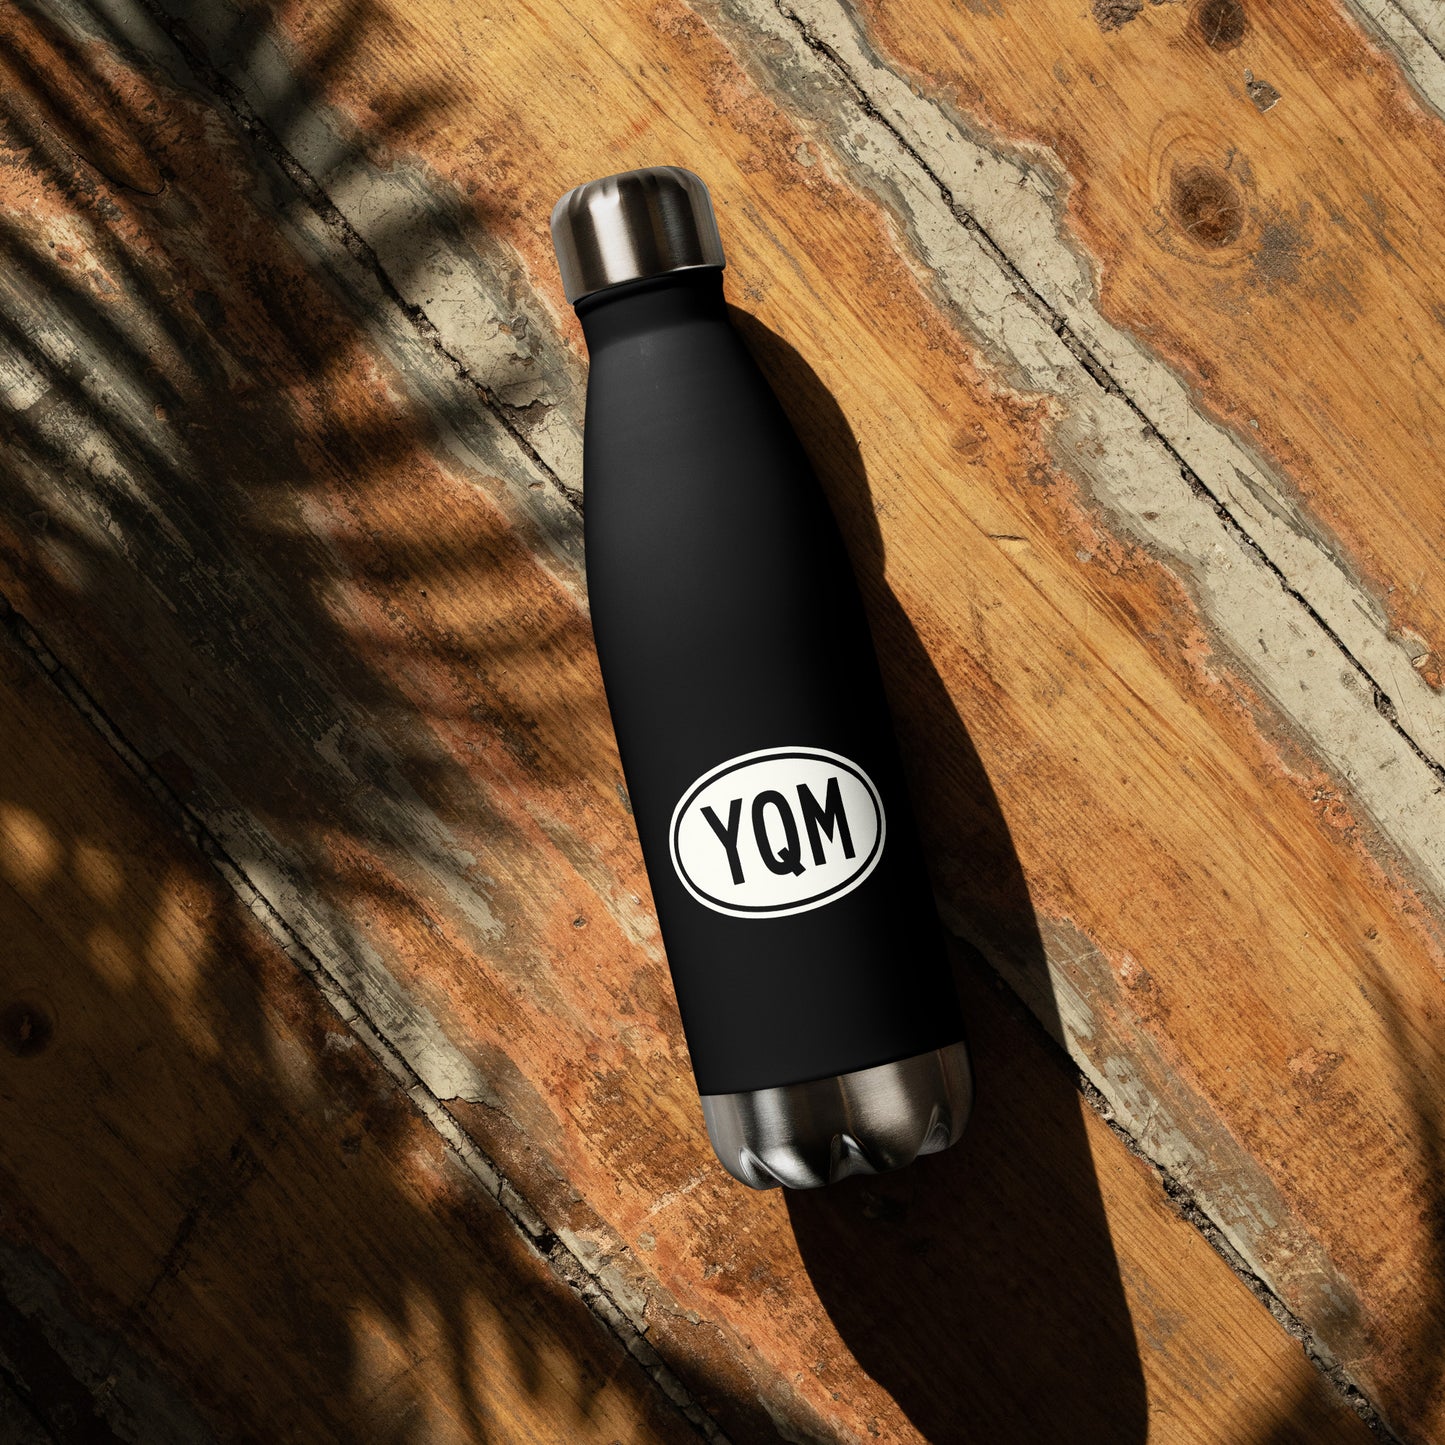 Unique Travel Gift Water Bottle - White Oval • YQM Moncton • YHM Designs - Image 03